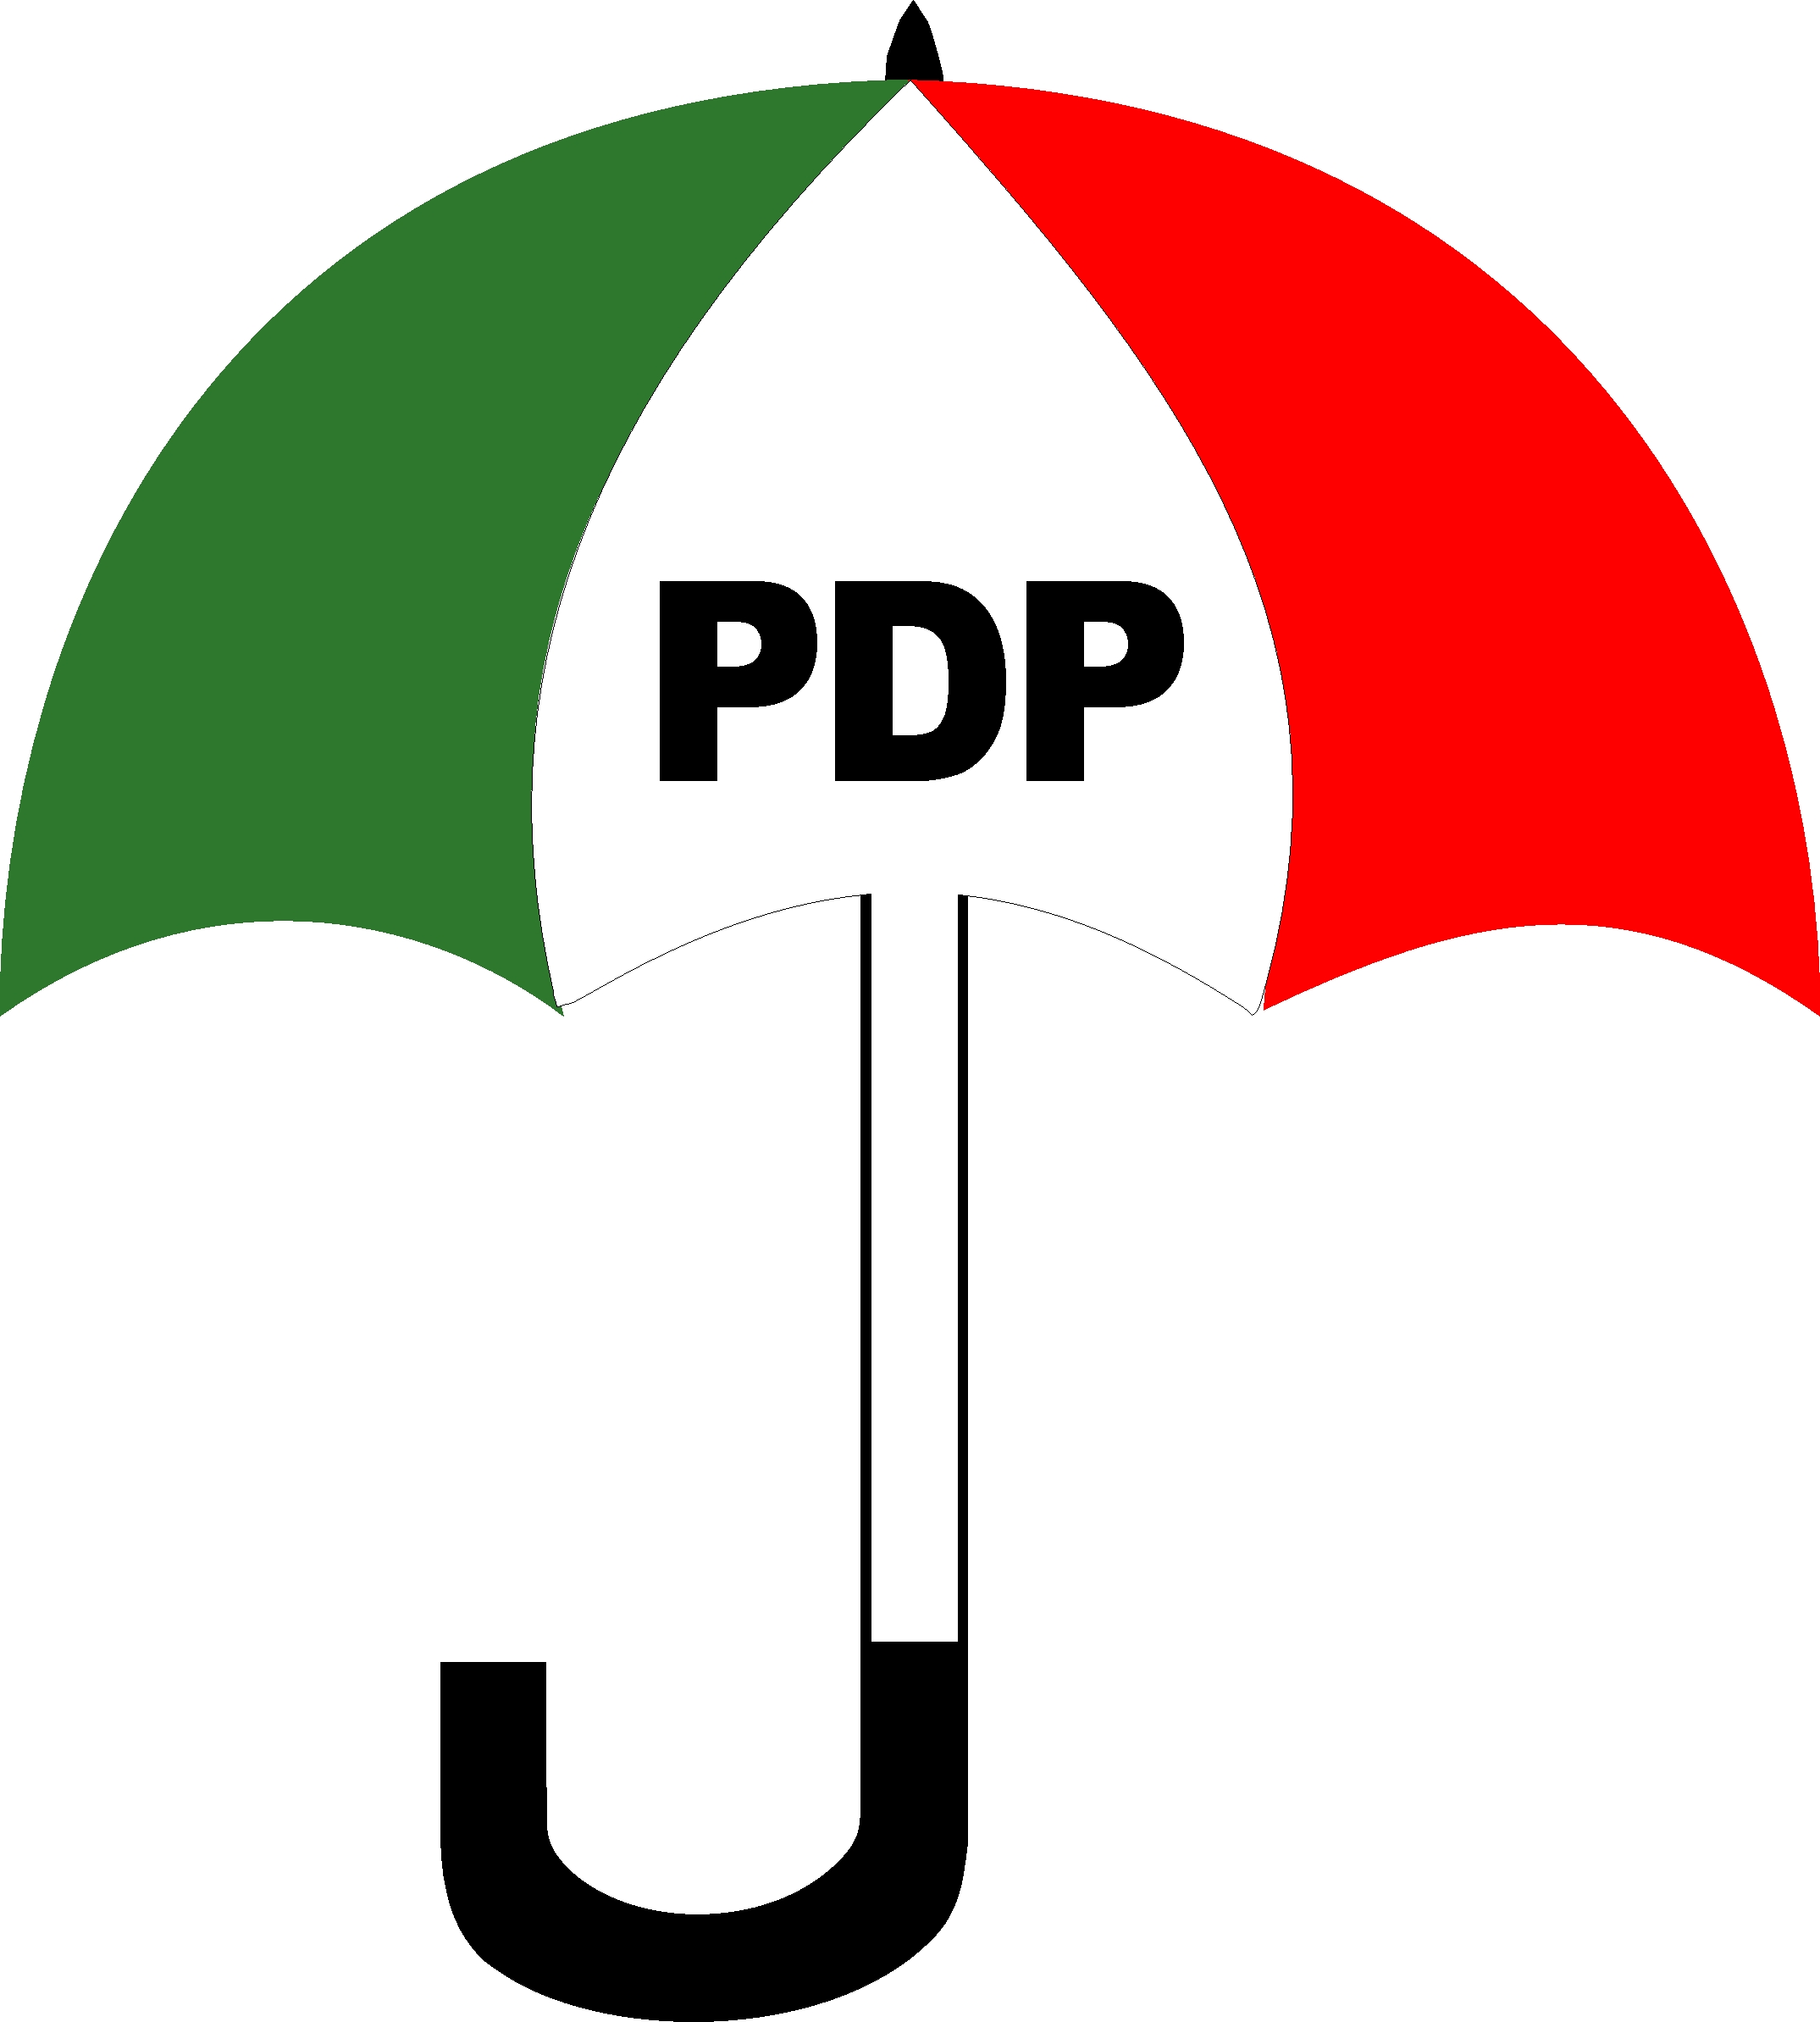 PDP Set For State Congress In Plateau